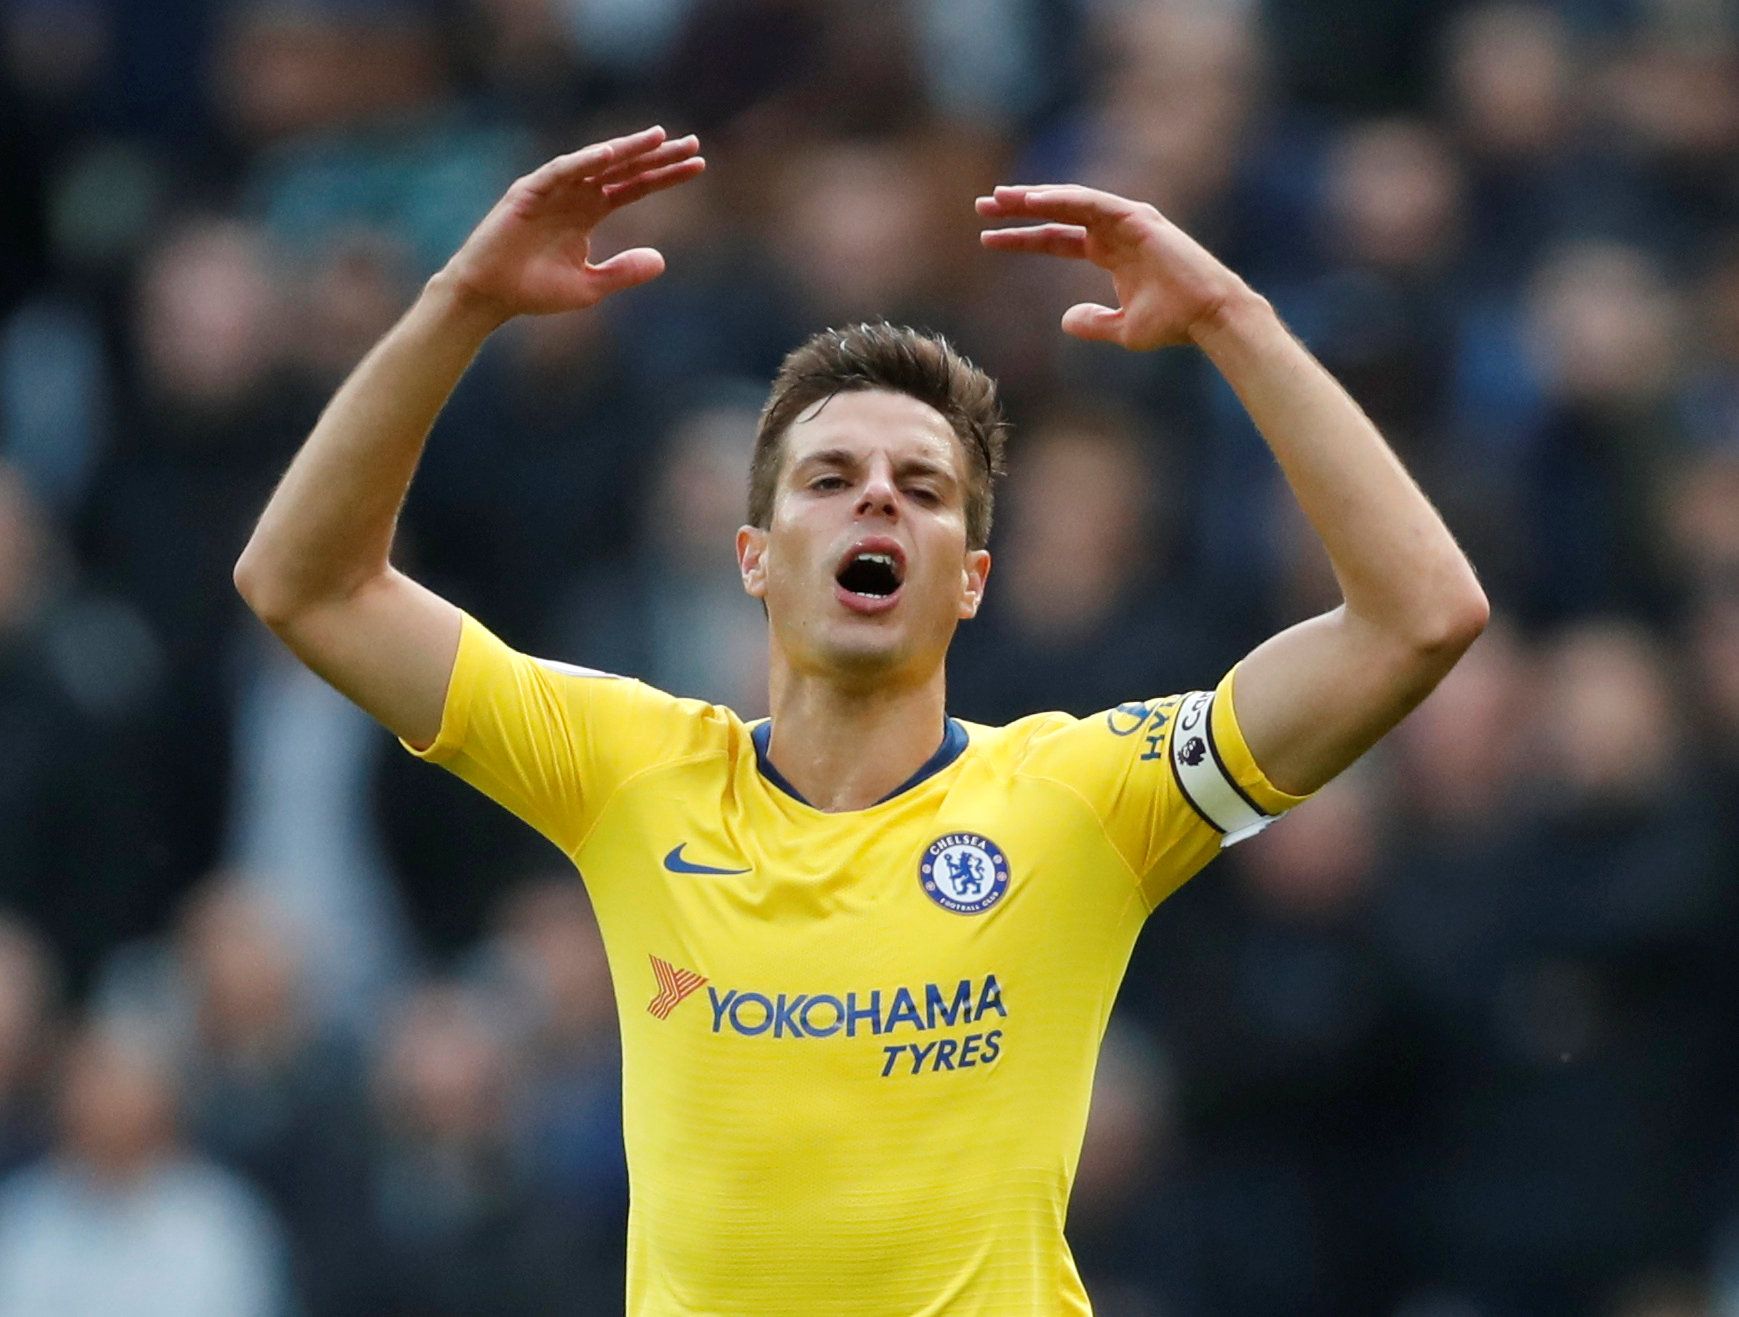 Cesar Azpilicueta throws his hands up in frustration during West Ham United v Chelsea